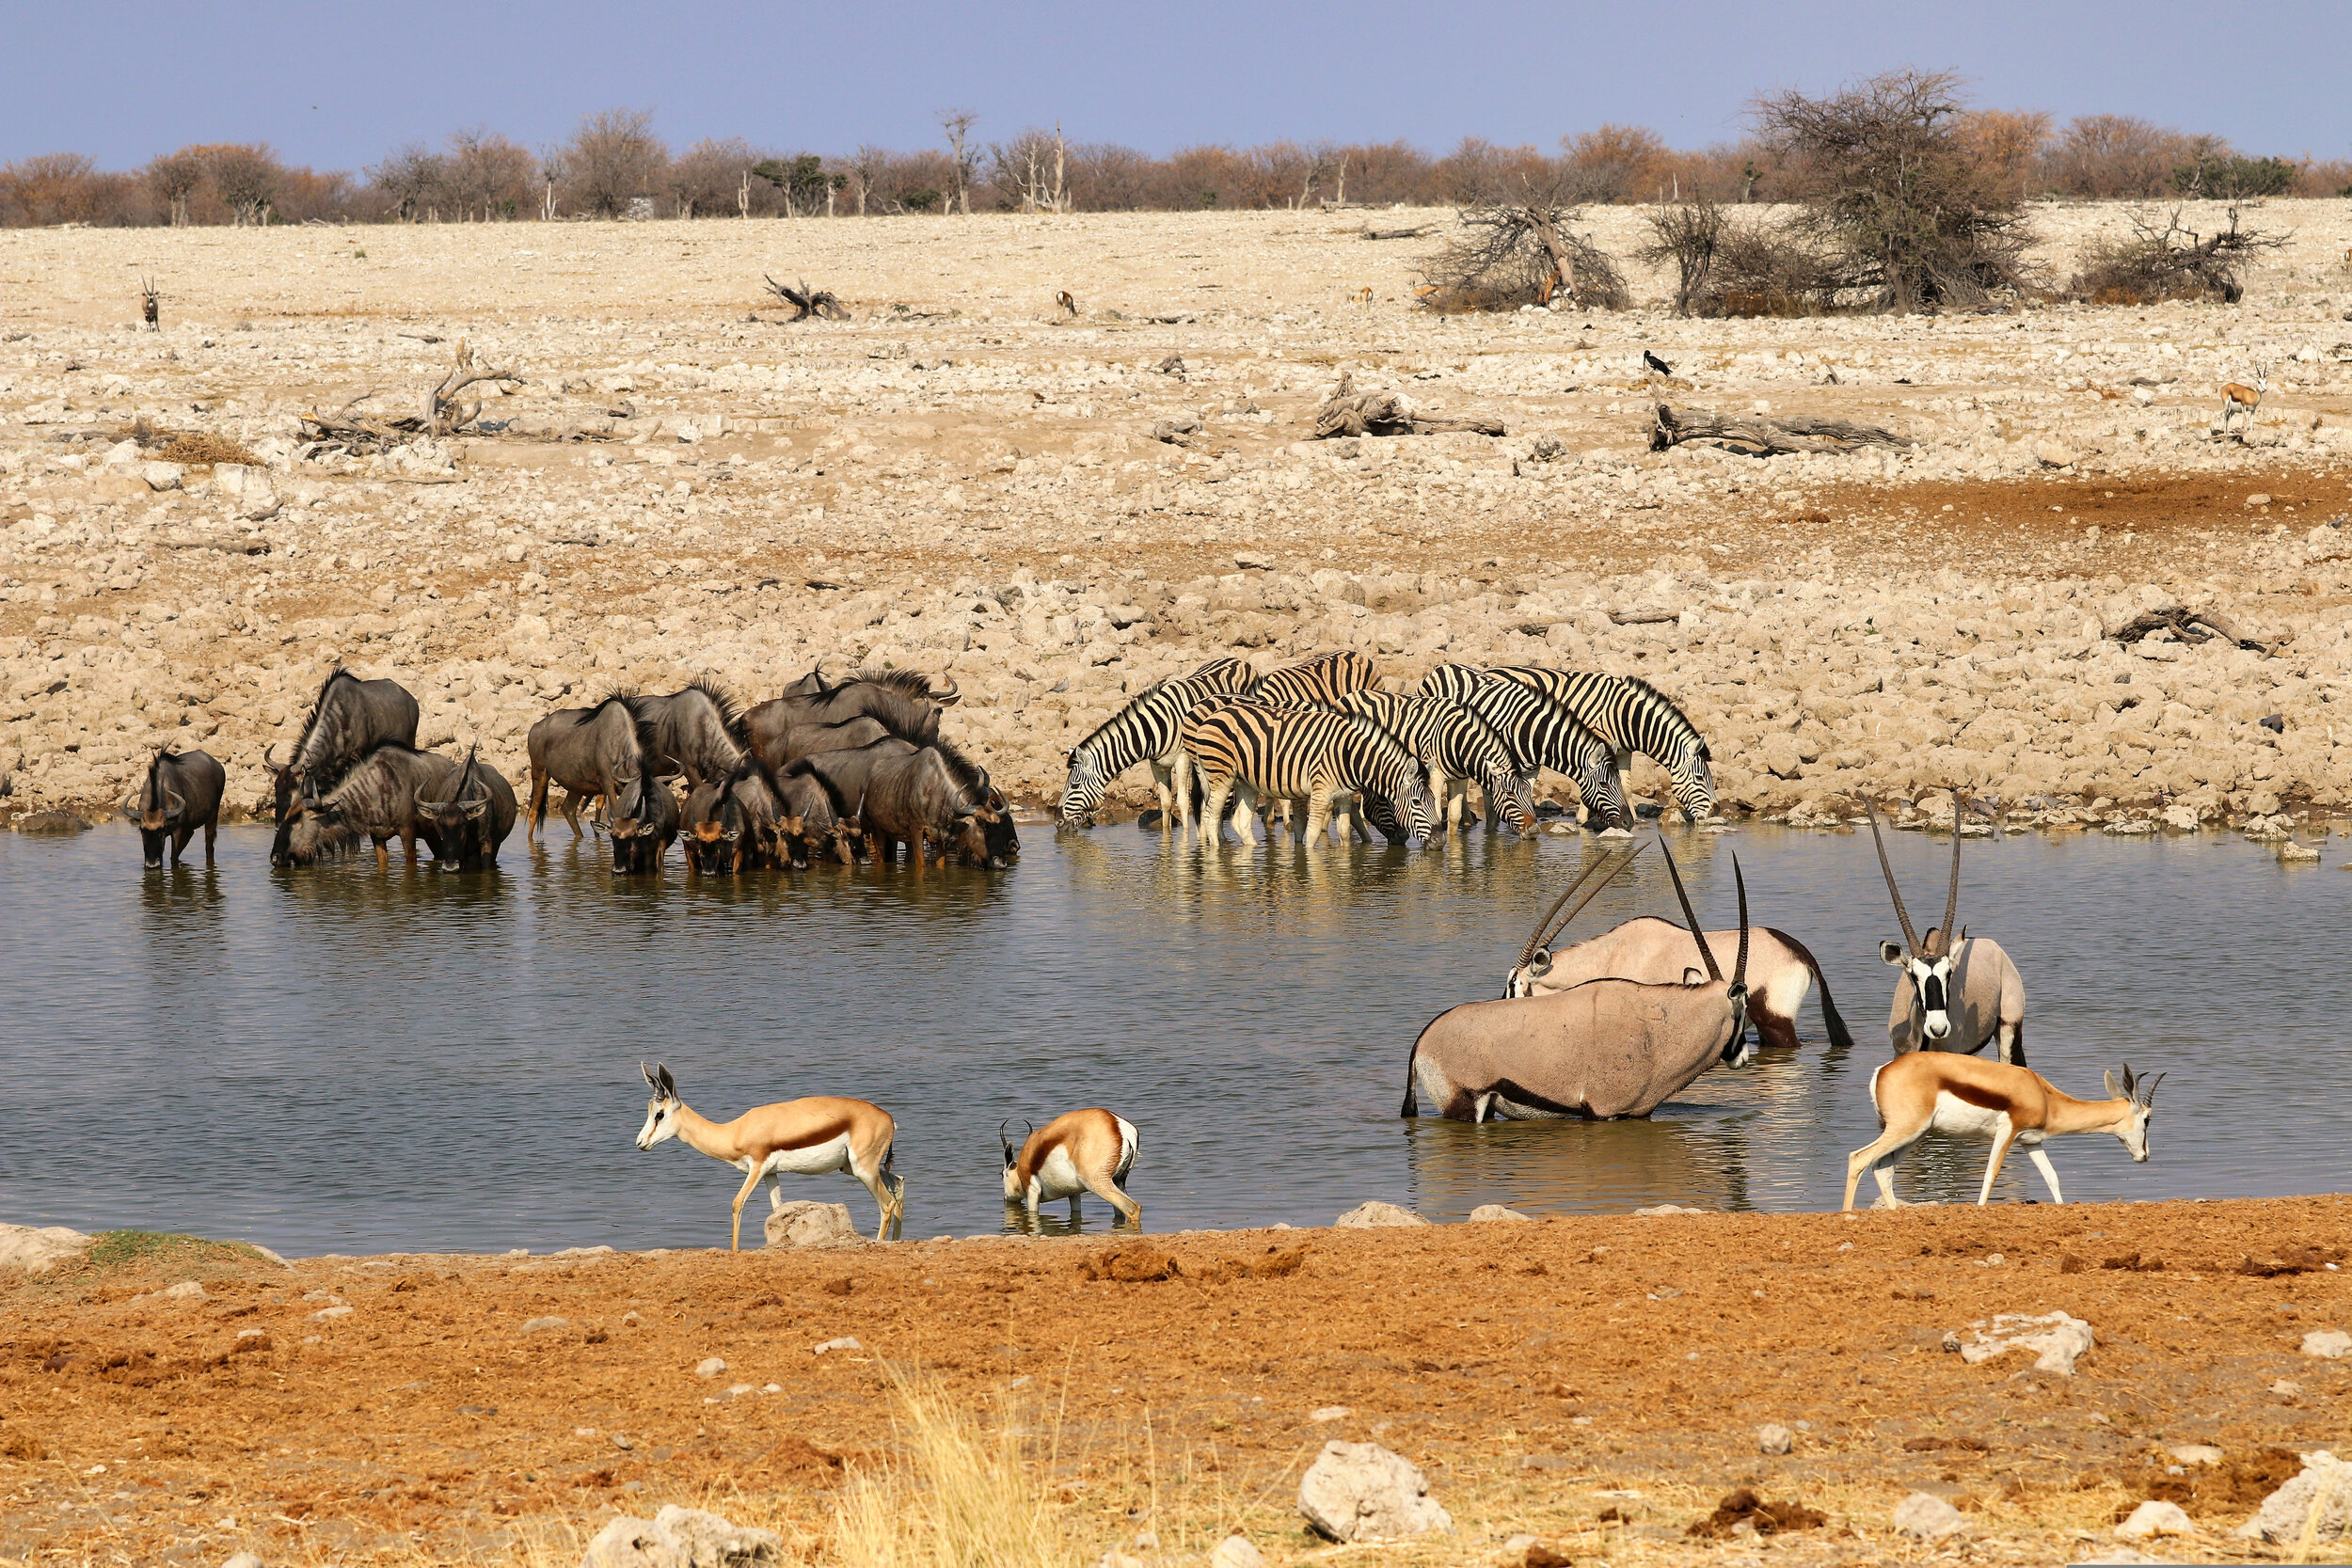 animals drinking from a waterhole with sand and rocks in the background